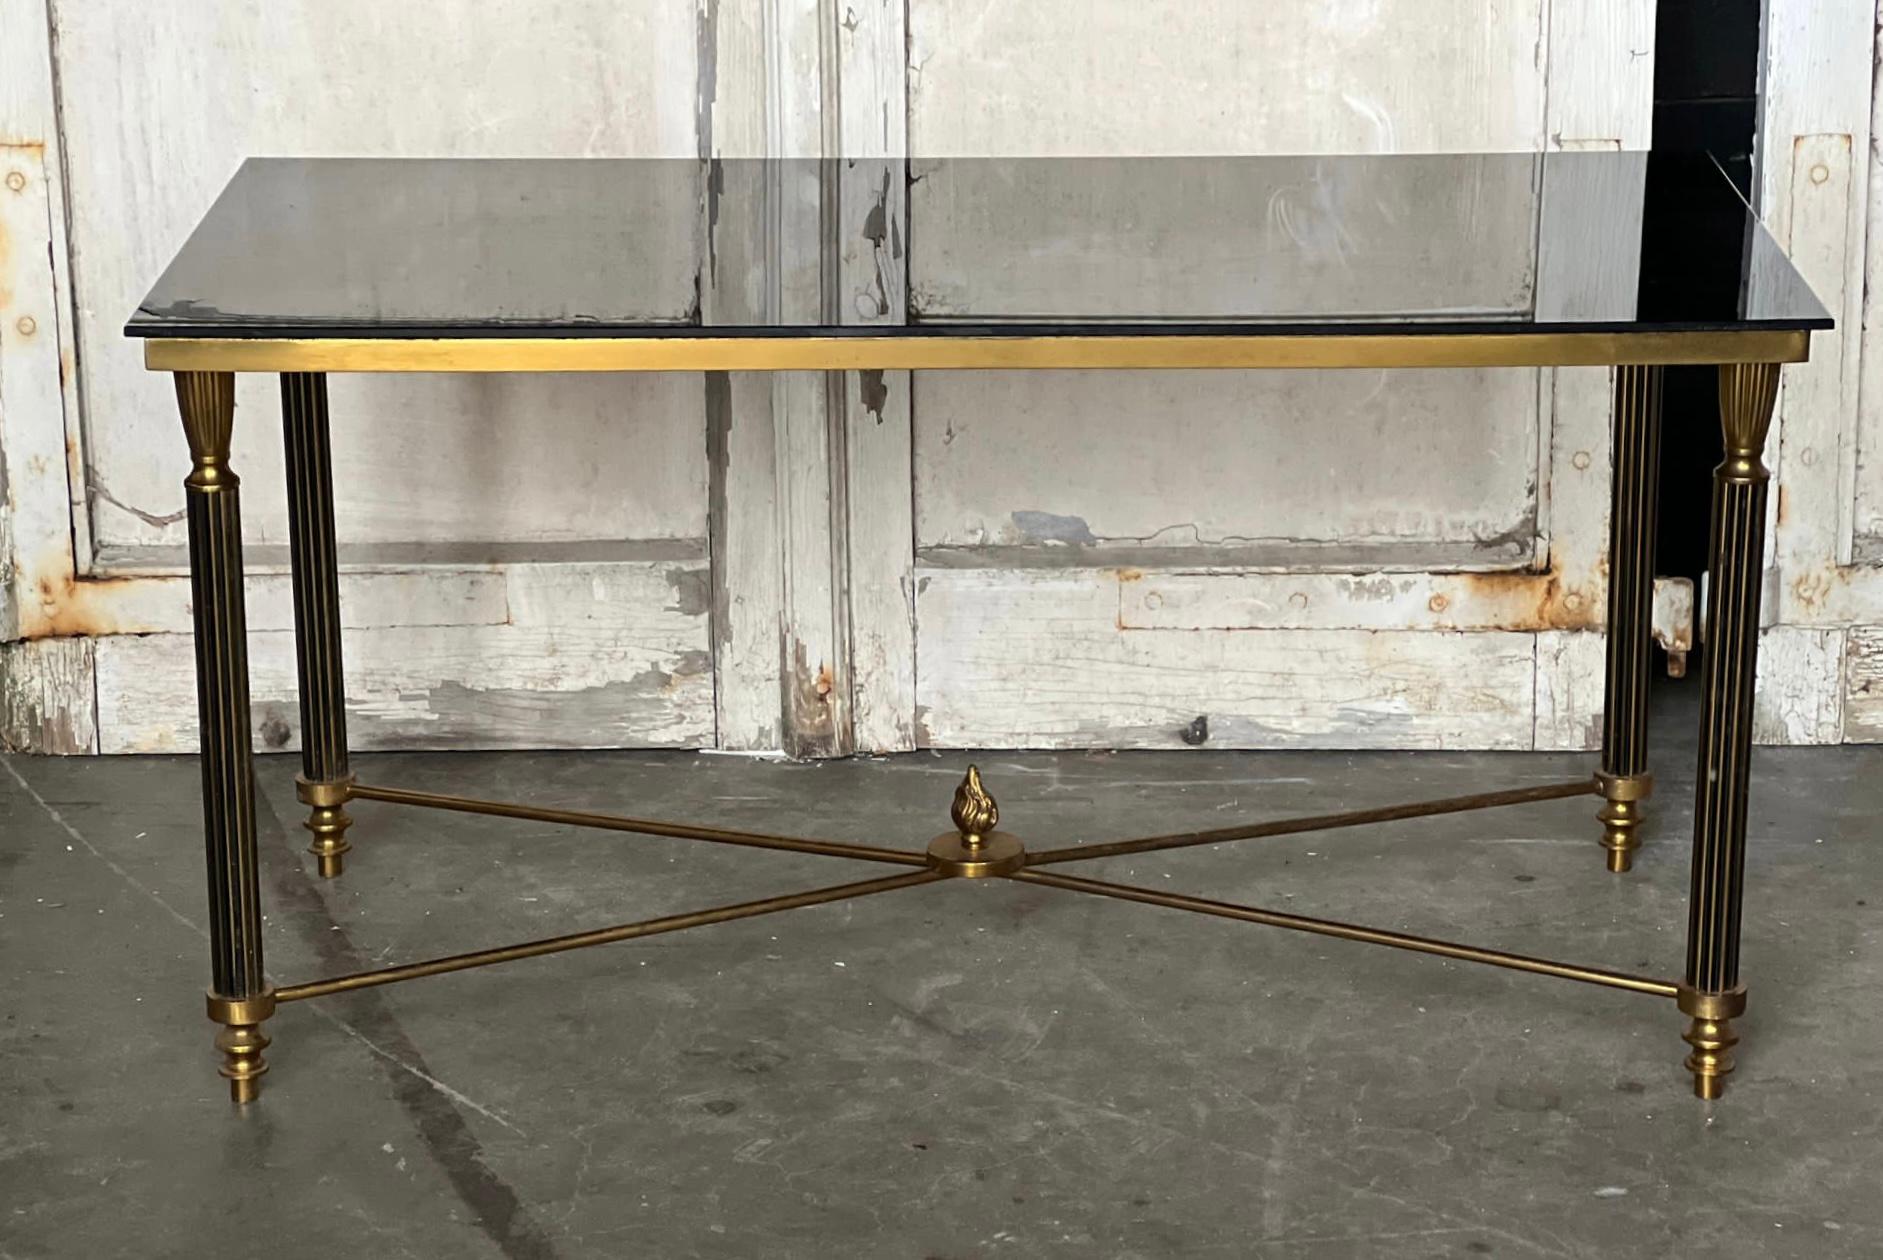 A very high quality French brass and glass coffee table. This came from a Parisian apartment and is in excellent original condition.
Measures: Width 95 cm
Depth 46 cm
Height 48.5 cm.